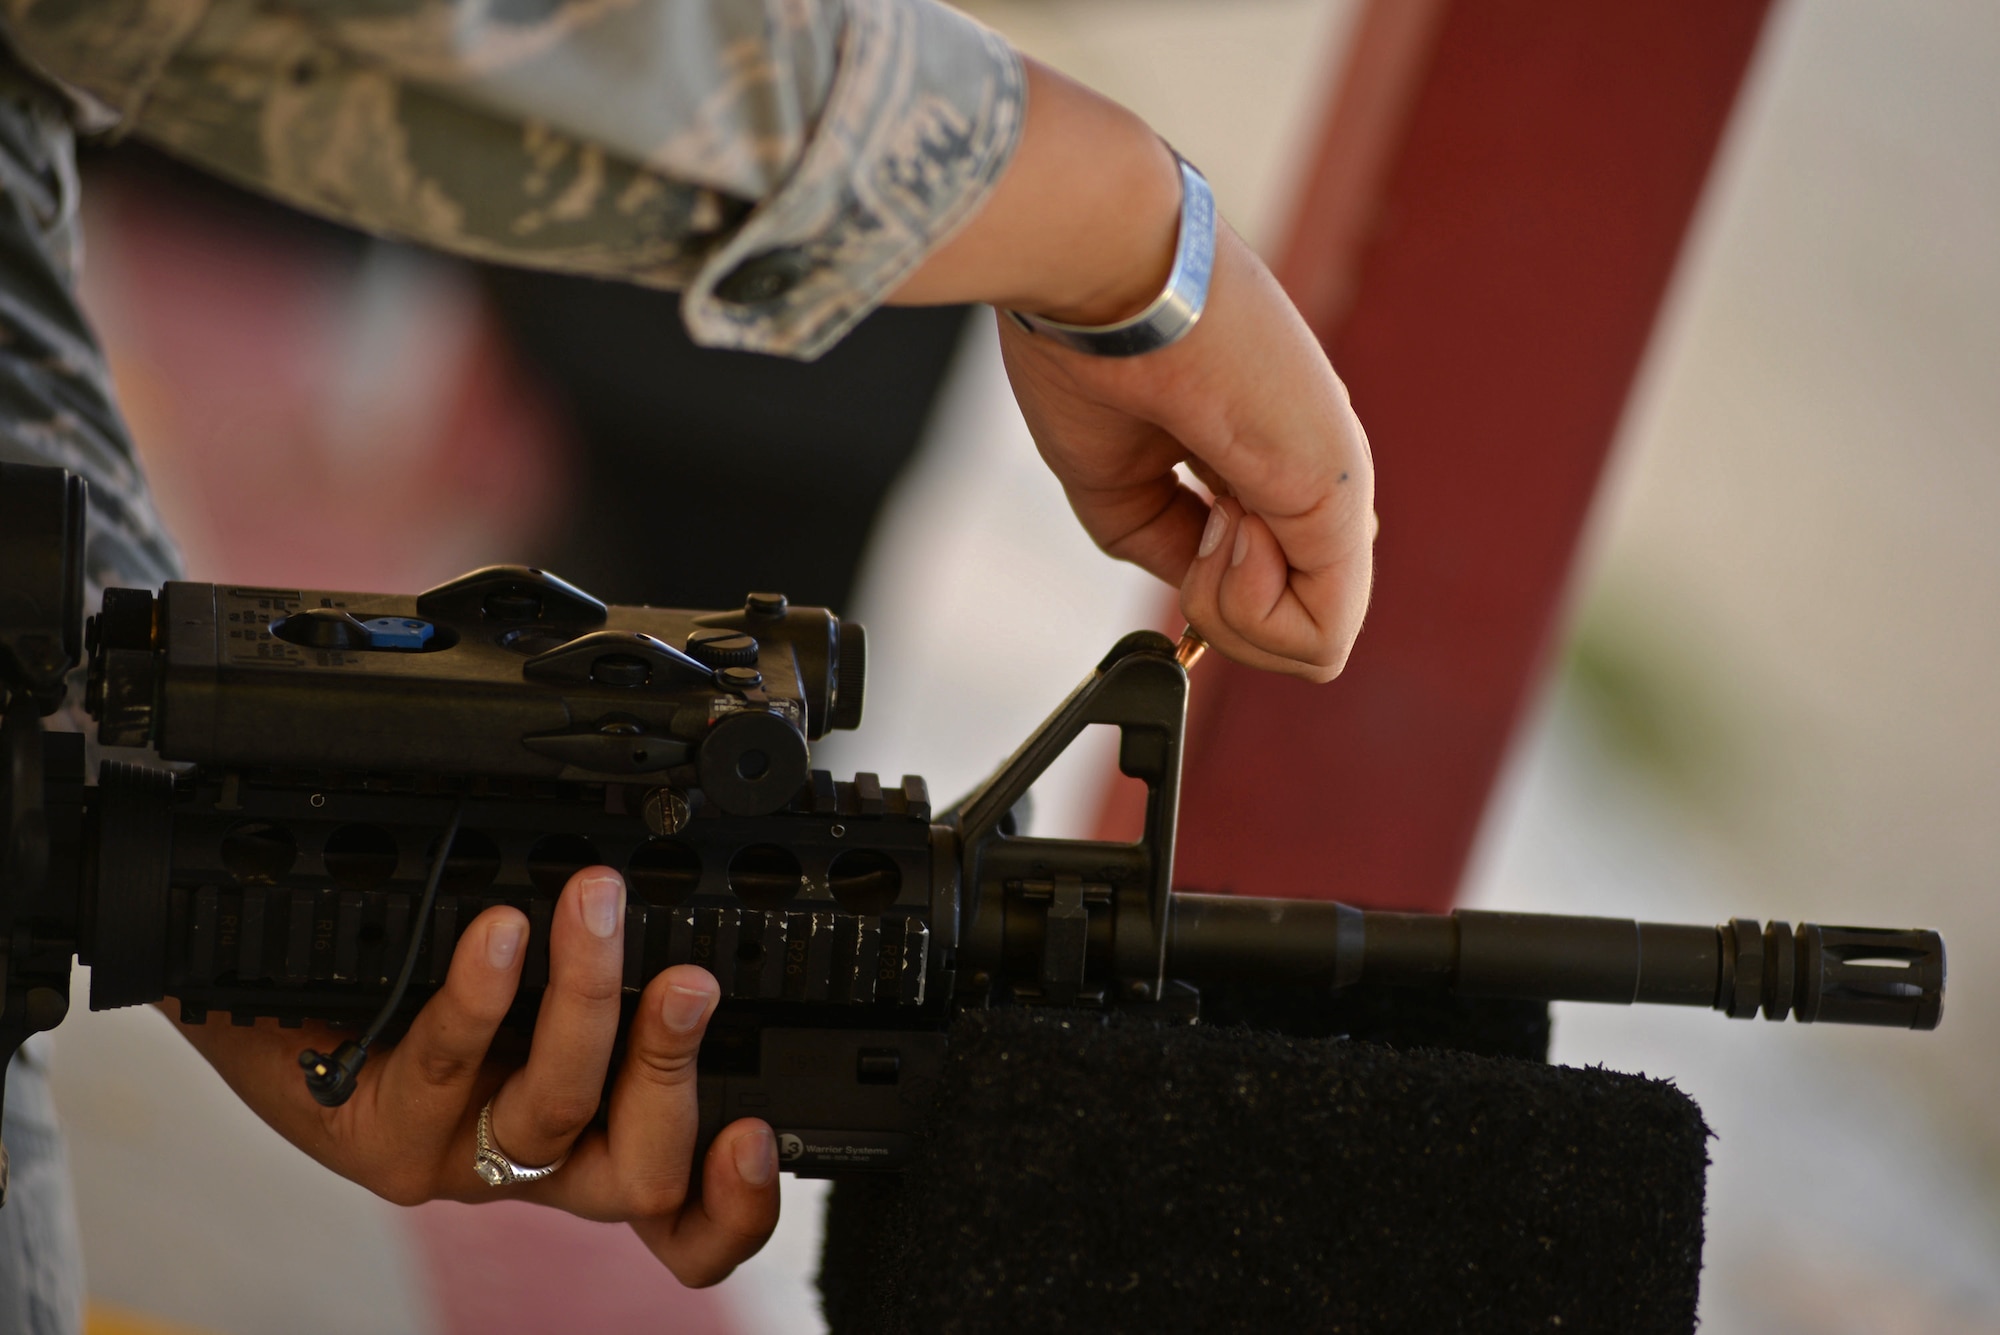 Airman 1st Class Mylia Simpson, 36th Security Forces Squadron entry controller, adjusts the front sight of her M4 carbine July 7, 2016, at Andersen Air Force Base, Guam. The target is used to determine how sights need to be adjusted and consists of a four quadrant grid with a target in the center. If the shots fired all land in an area other than the target, the grid system indicates the variance and in which direction to adjust rear and front sights. (U.S. Air Force photo by Airman 1st Class Jacob Skovo)